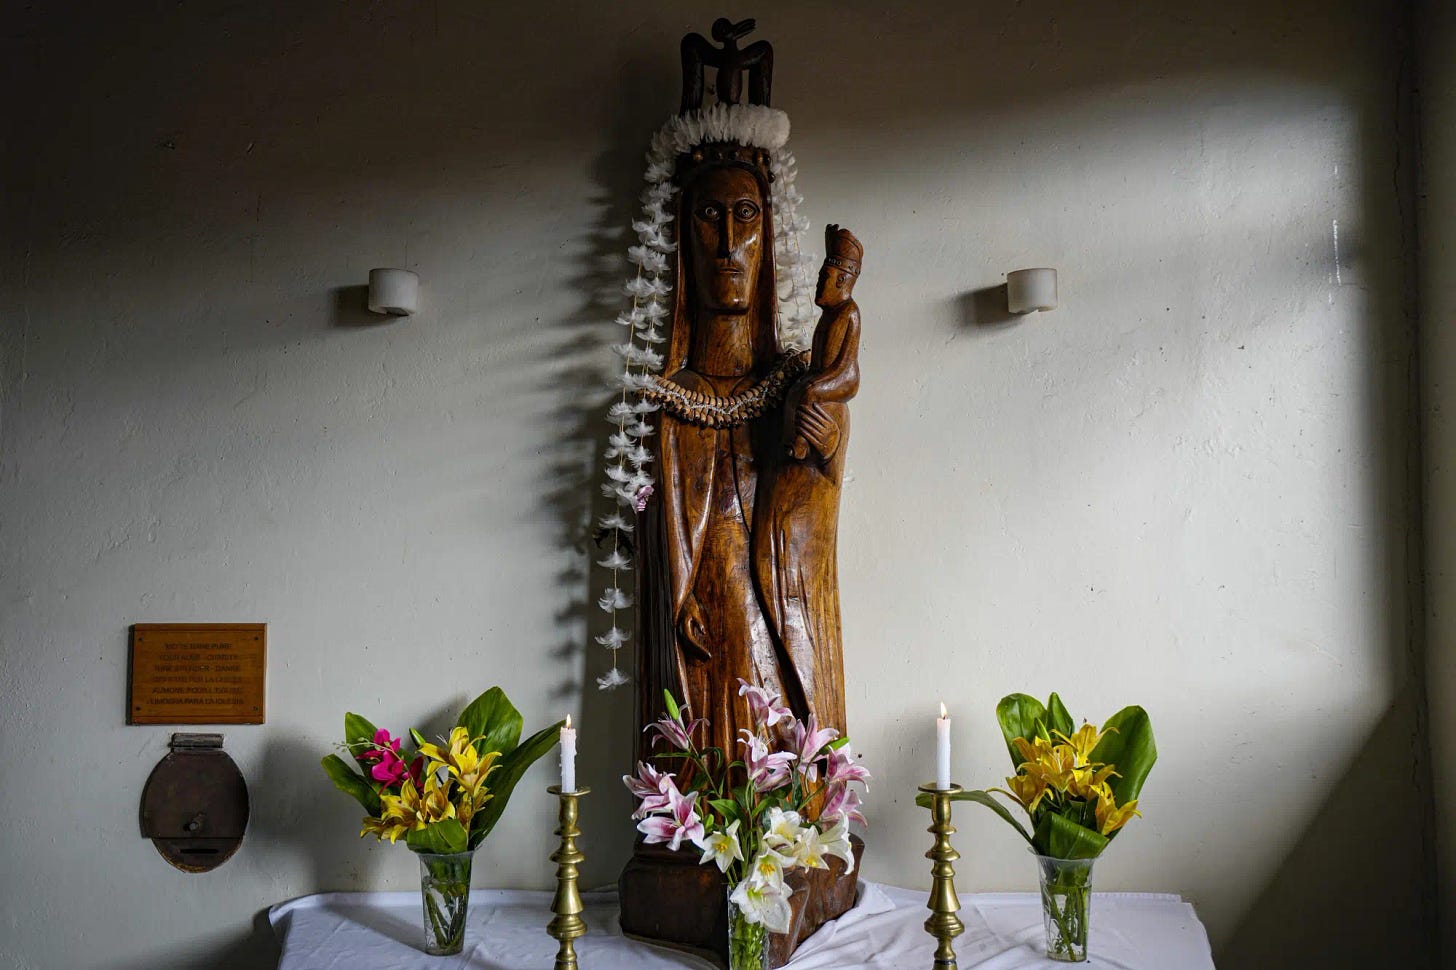 A Virgin Mary statue, with the physiognomy of the Rapanui people, stands on an altar at the Catholic Church of the Holy Cross in Rapa Nui, or Easter Island, Chile, Monday, Nov, 21 , 2022. The first Europeans arrived to Rapa Nui in 1722, soon followed by missionaries, when Rapanui religiosity began to intertwine with Christianity. (AP Photo/Esteban Felix)